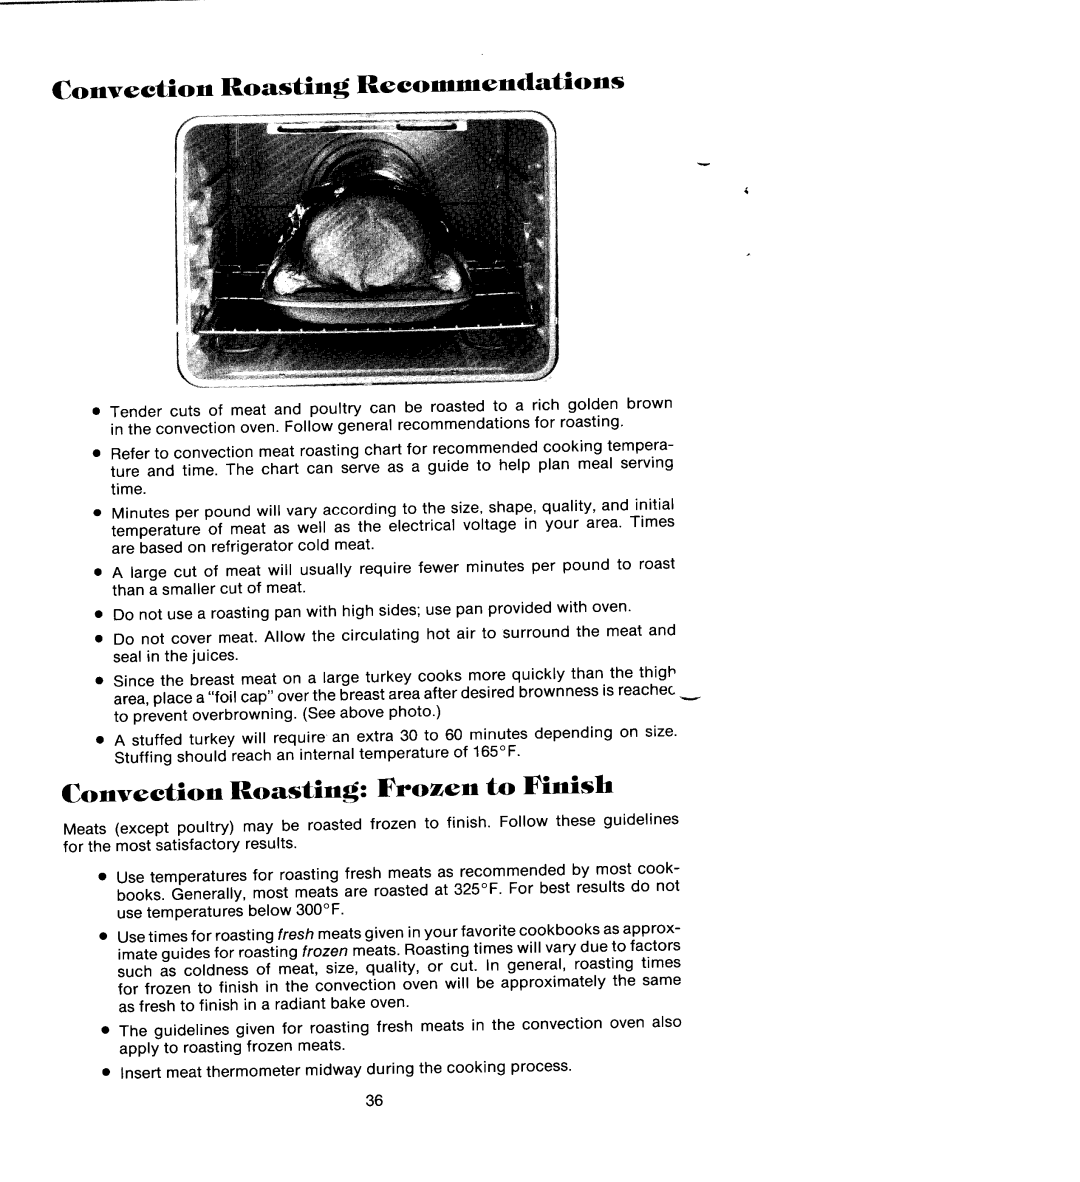 Jenn-Air SEG196 manual Convection Roasting Recommendations, Convection Roasting Frozen to Finish 